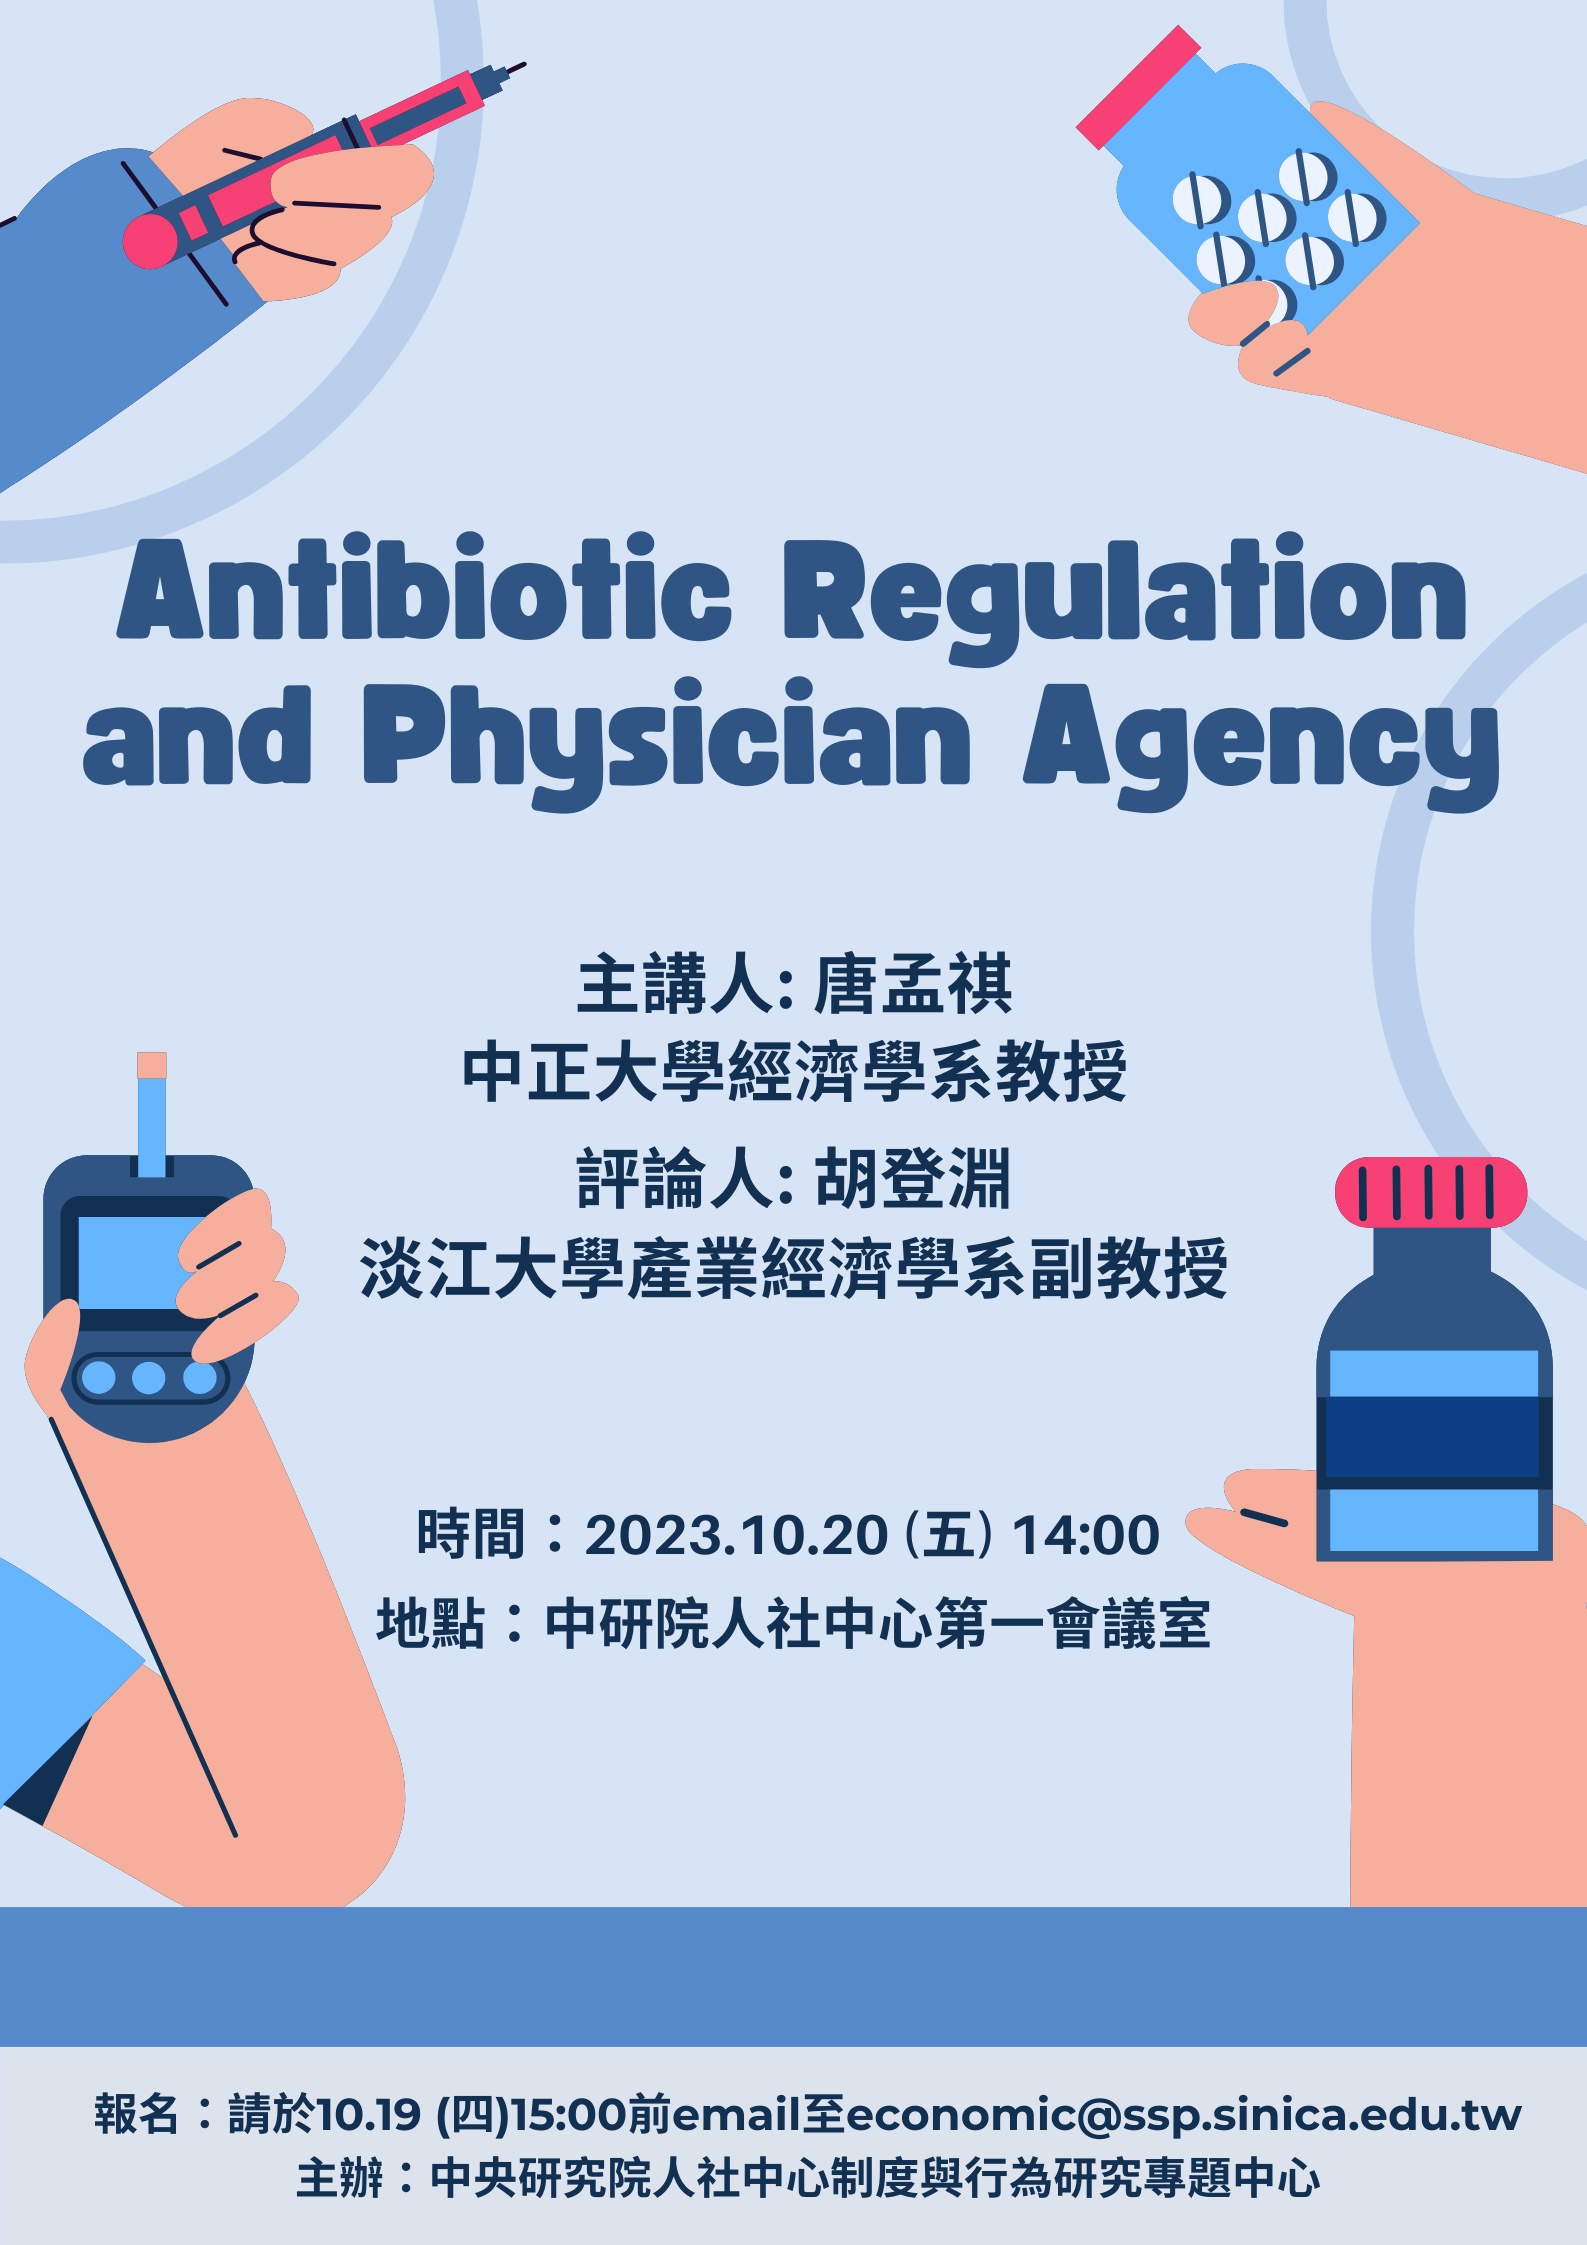 Antibiotic Regulation and Physician Agency